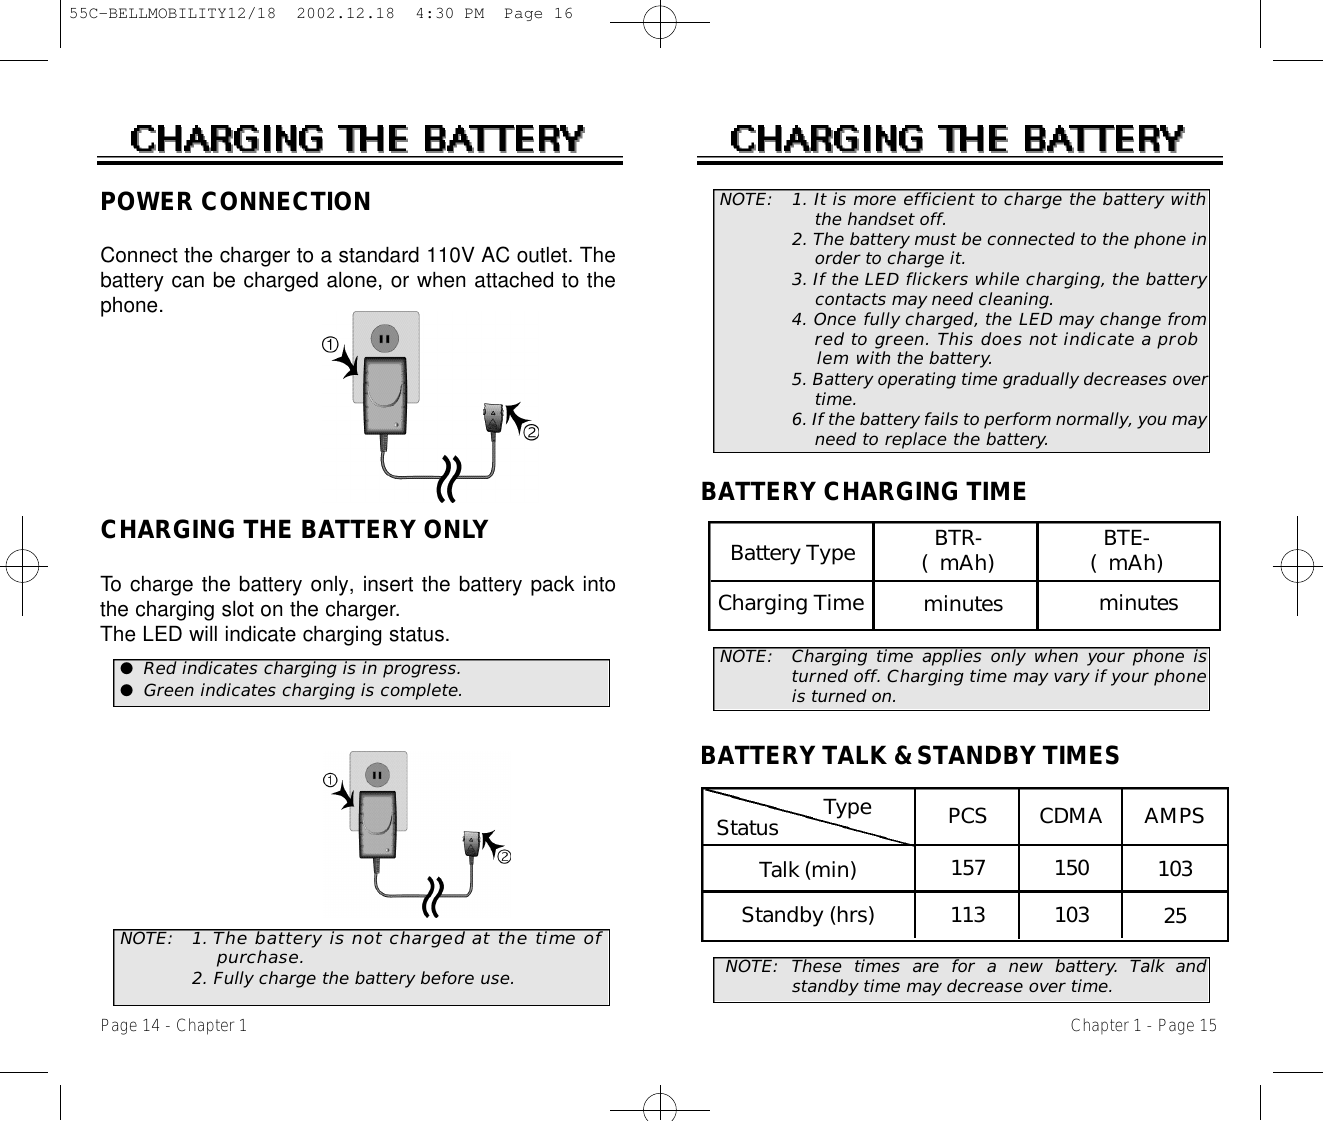 NOTE: Charging time applies only when your phone ist u r ned off. Charging time may vary if your phoneis turned on. NOTE: These times are for a new battery. Talk andstandby time may decrease over time.BATTERY TALK &amp; STANDBY TIMESBattery Type BTR- (  mAh) minutesBTE- (  mAh)minutesCharging TimeStatus Type PCS CDMA AMPS157 150 103113 103 25Talk (min)Standby (hrs)BATTERY CHARGING TIMEChapter 1 - Page 15NOTE: 1. It is more efficient to charge the battery withthe handset off.2. The battery must be connected to the phone inorder to charge it.3. If the LED flickers while charging, the batterycontacts may need cleaning.4. Once fully charged, the LED may change fro mred to green. This does not indicate a pro bl e m with the battery.5. Battery operating time gradually decreases overtime.6. If the battery fails to perform normally, you mayneed to replace the battery.Page 14 - Chapter 1POWER CONNECTIONConnect the charger to a standard 110V AC outlet. Thebattery can be charged alone, or when attached to thephone.NOTE:  1. The battery is not charged at the time ofp u rc h a s e .2. Fully charge the battery before use.●Red indicates charging is in progress.●Green indicates charging is complete.CHARGING THE BATTERY ONLYTo charge the battery only, insert the battery pack intothe charging slot on the charger.The LED will indicate charging status.55C-BELLMOBILITY12/18  2002.12.18  4:30 PM  Page 16